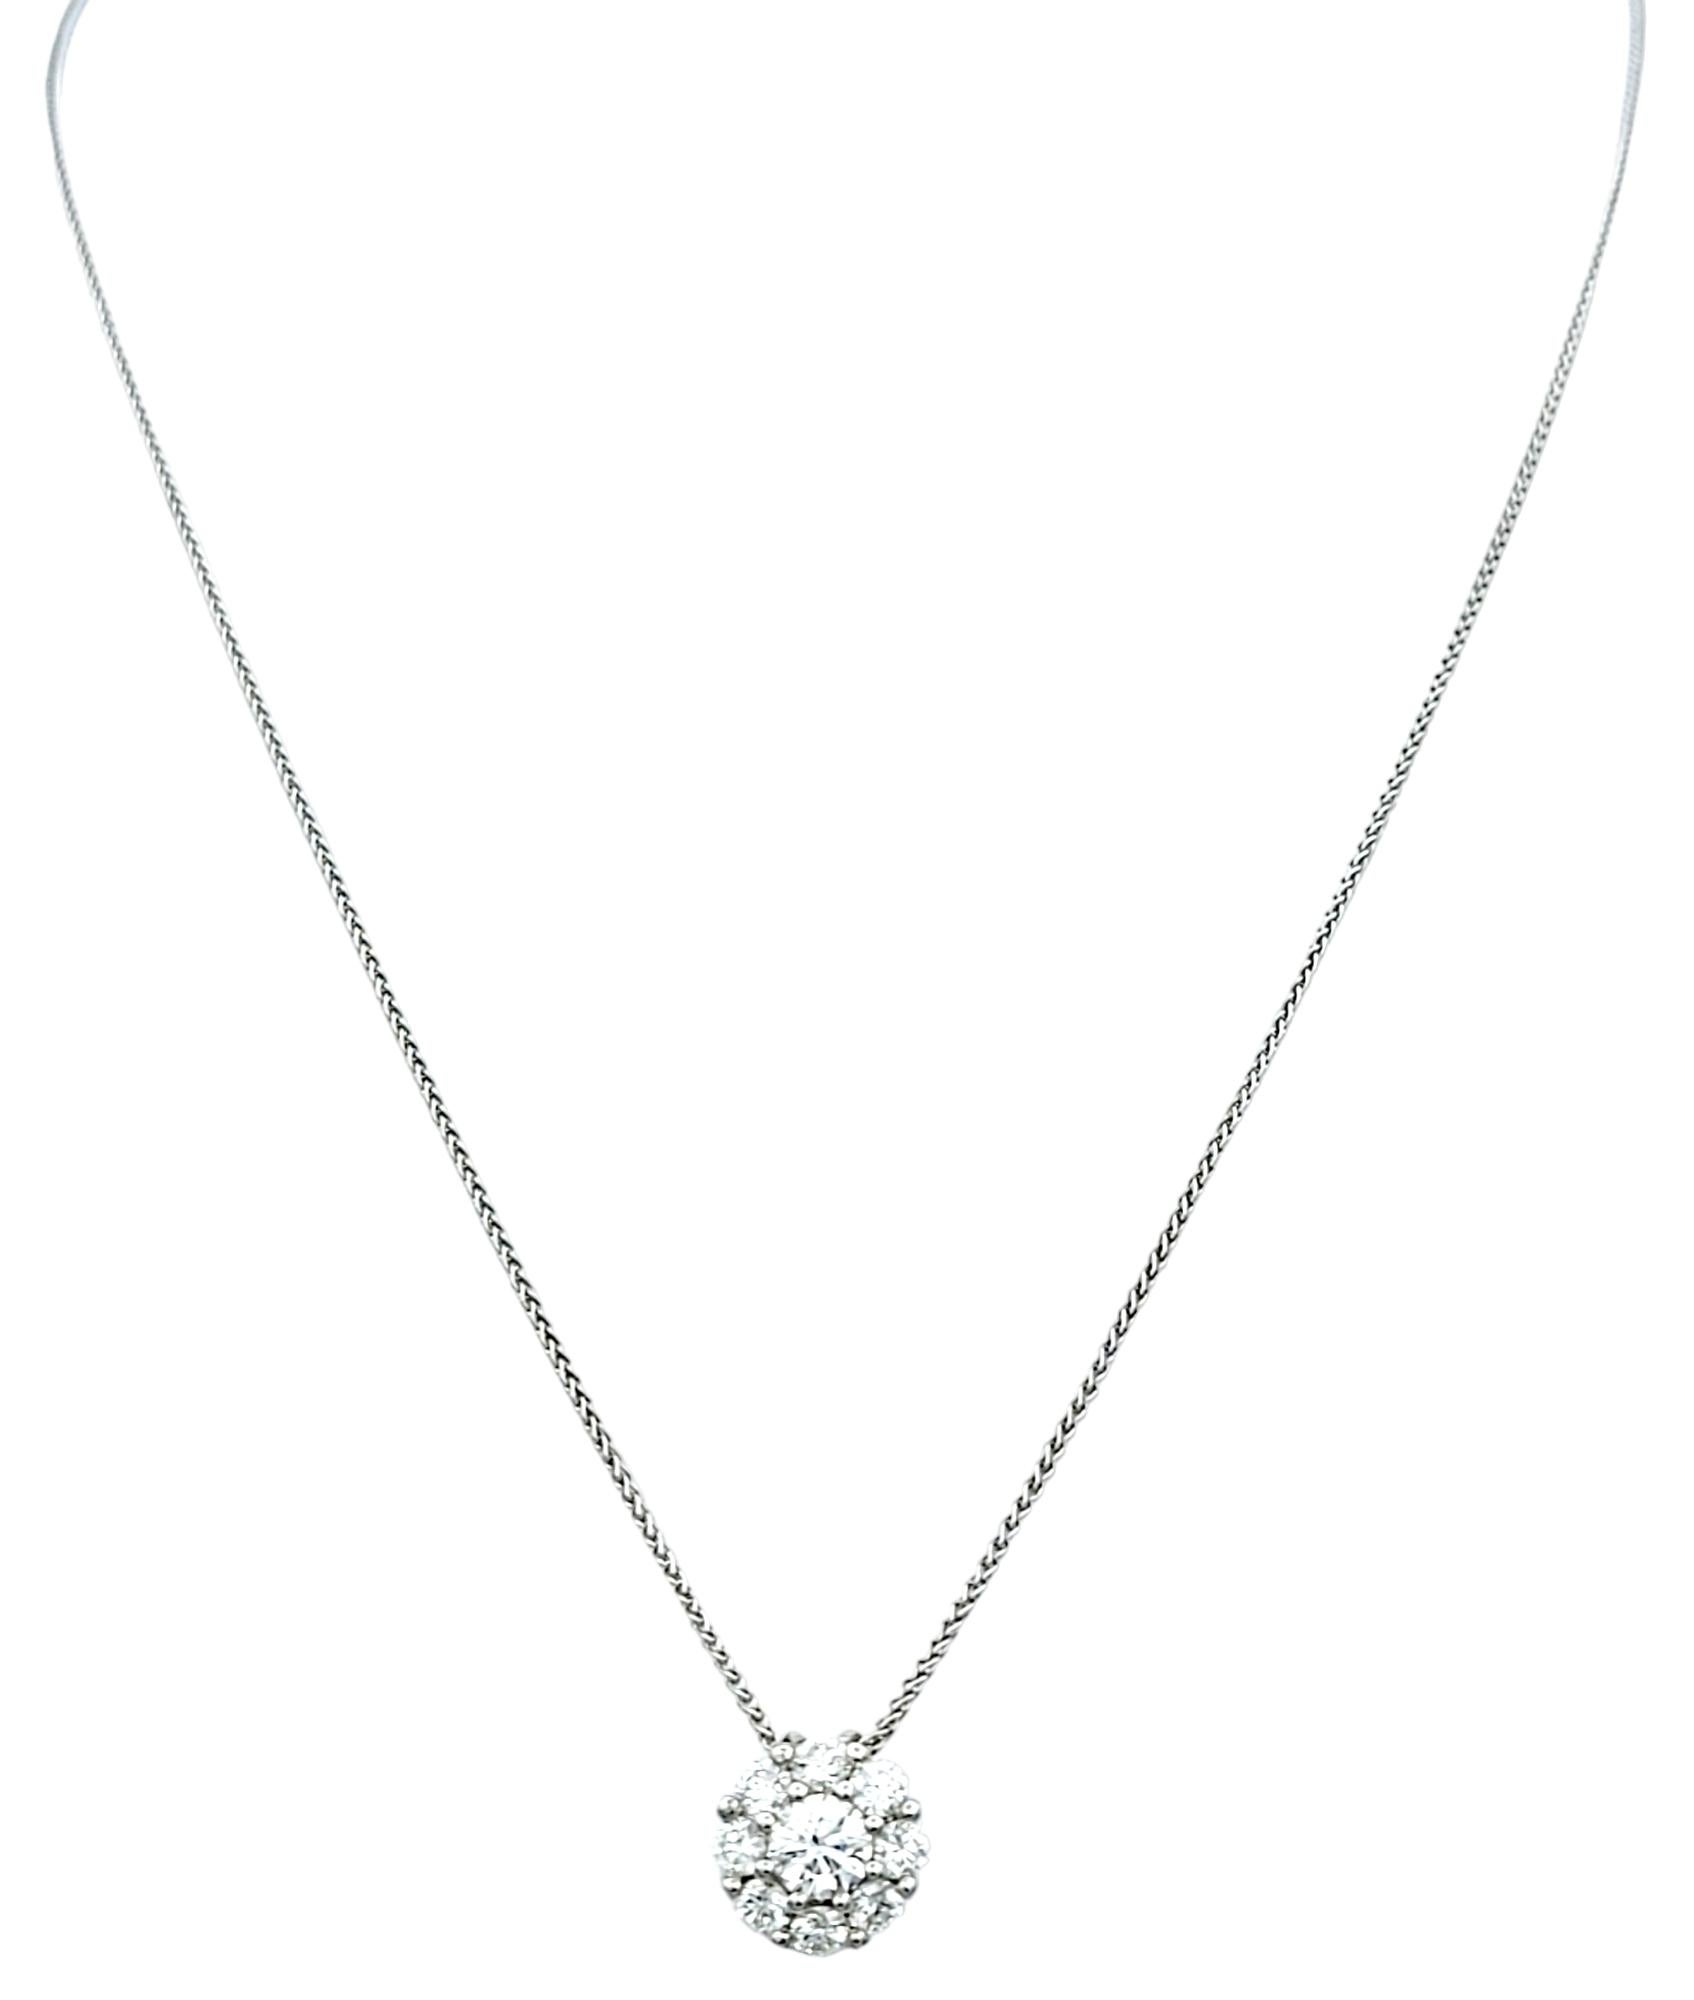  Round Diamond Halo Pendant Necklace with Wheat Chain in 18 Karat White Gold In Good Condition For Sale In Scottsdale, AZ